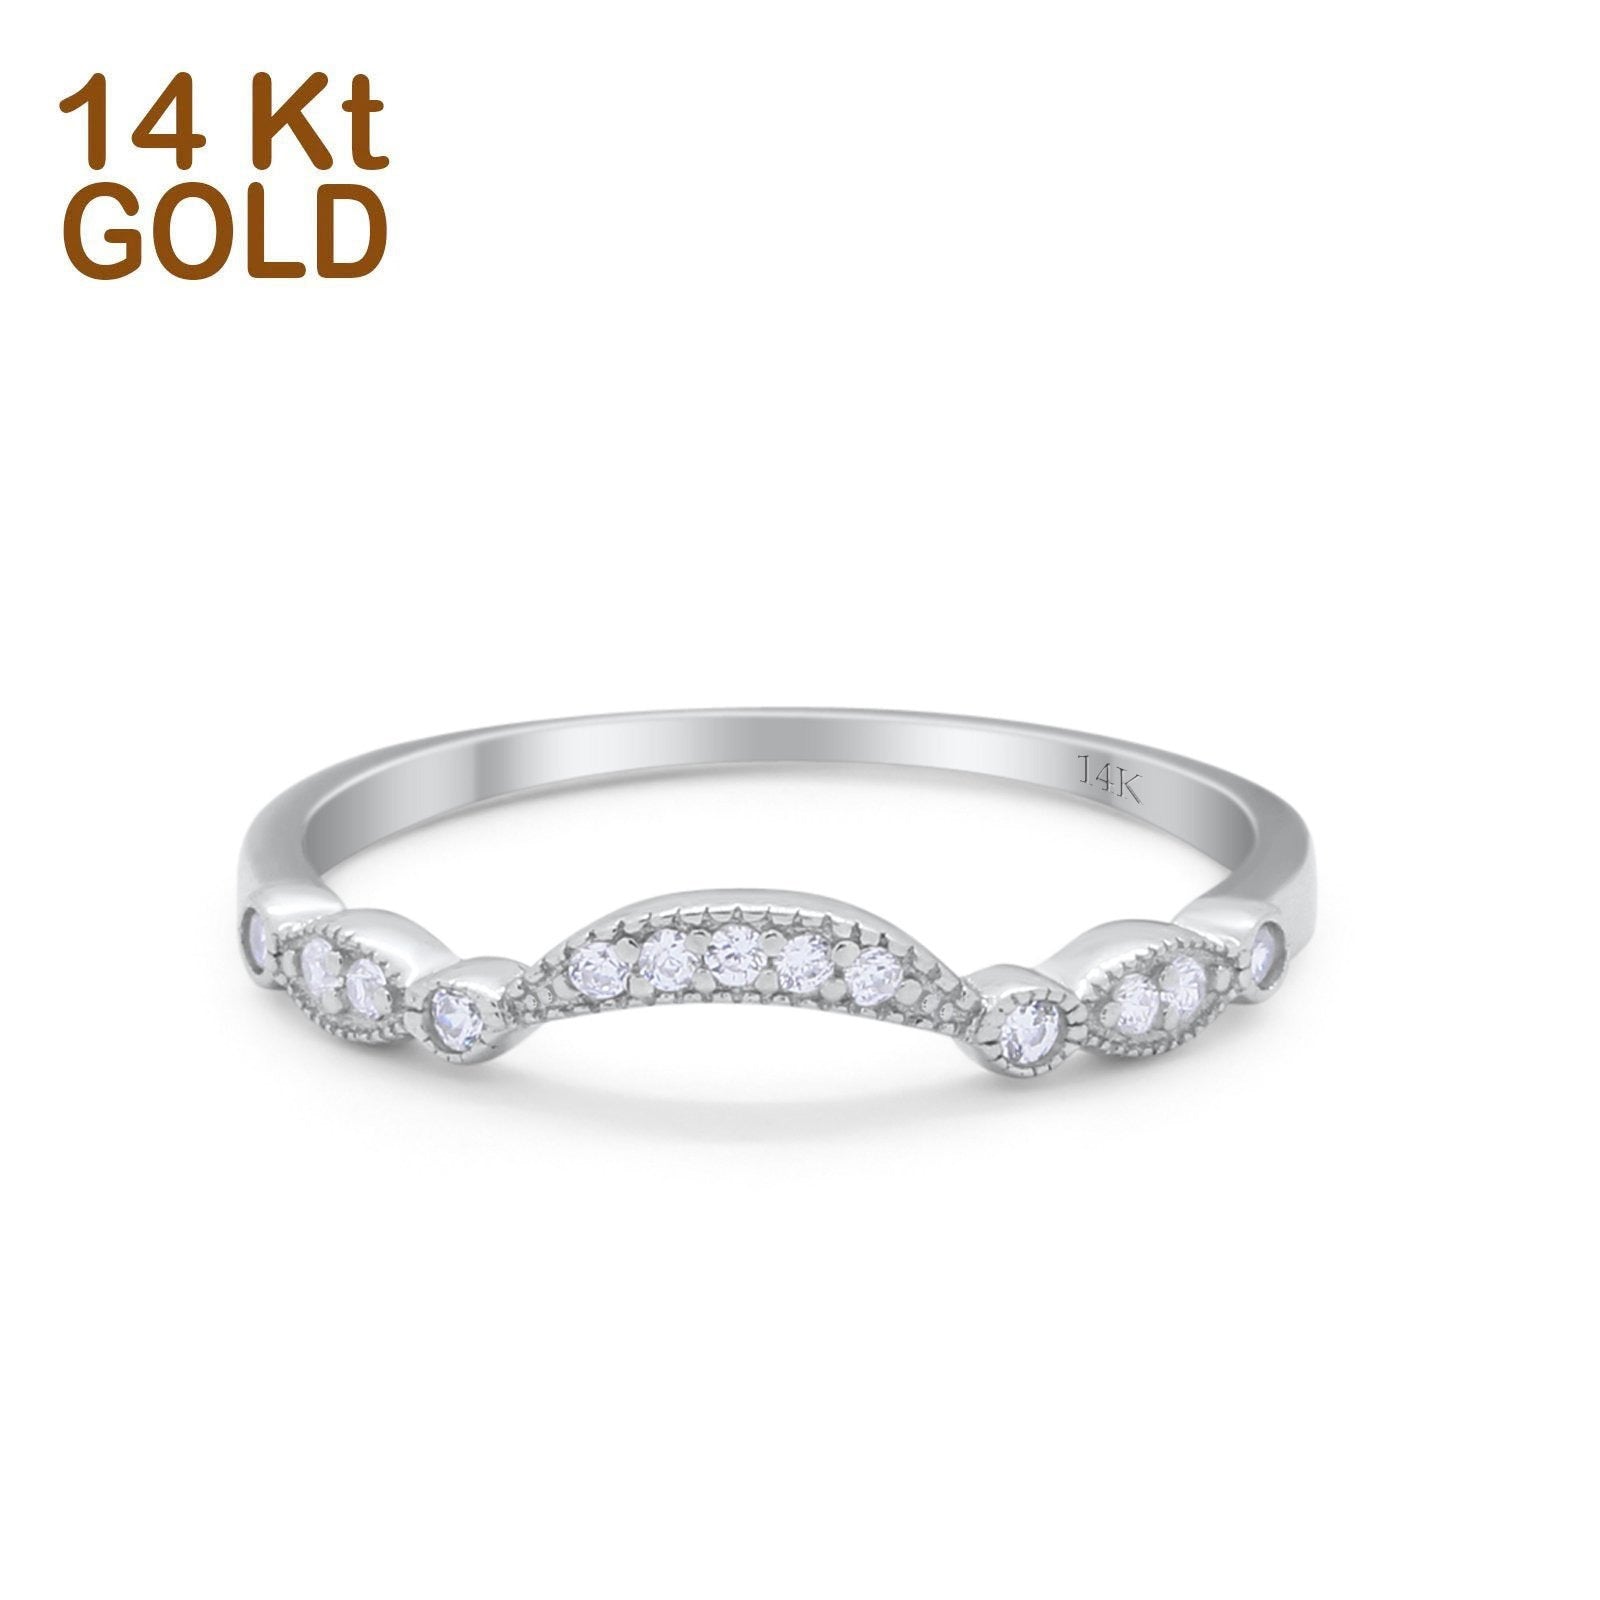 14K White Gold Art Deco Curved Wedding Band Eternity Ring Simulated Cubic Zirconia Size-7